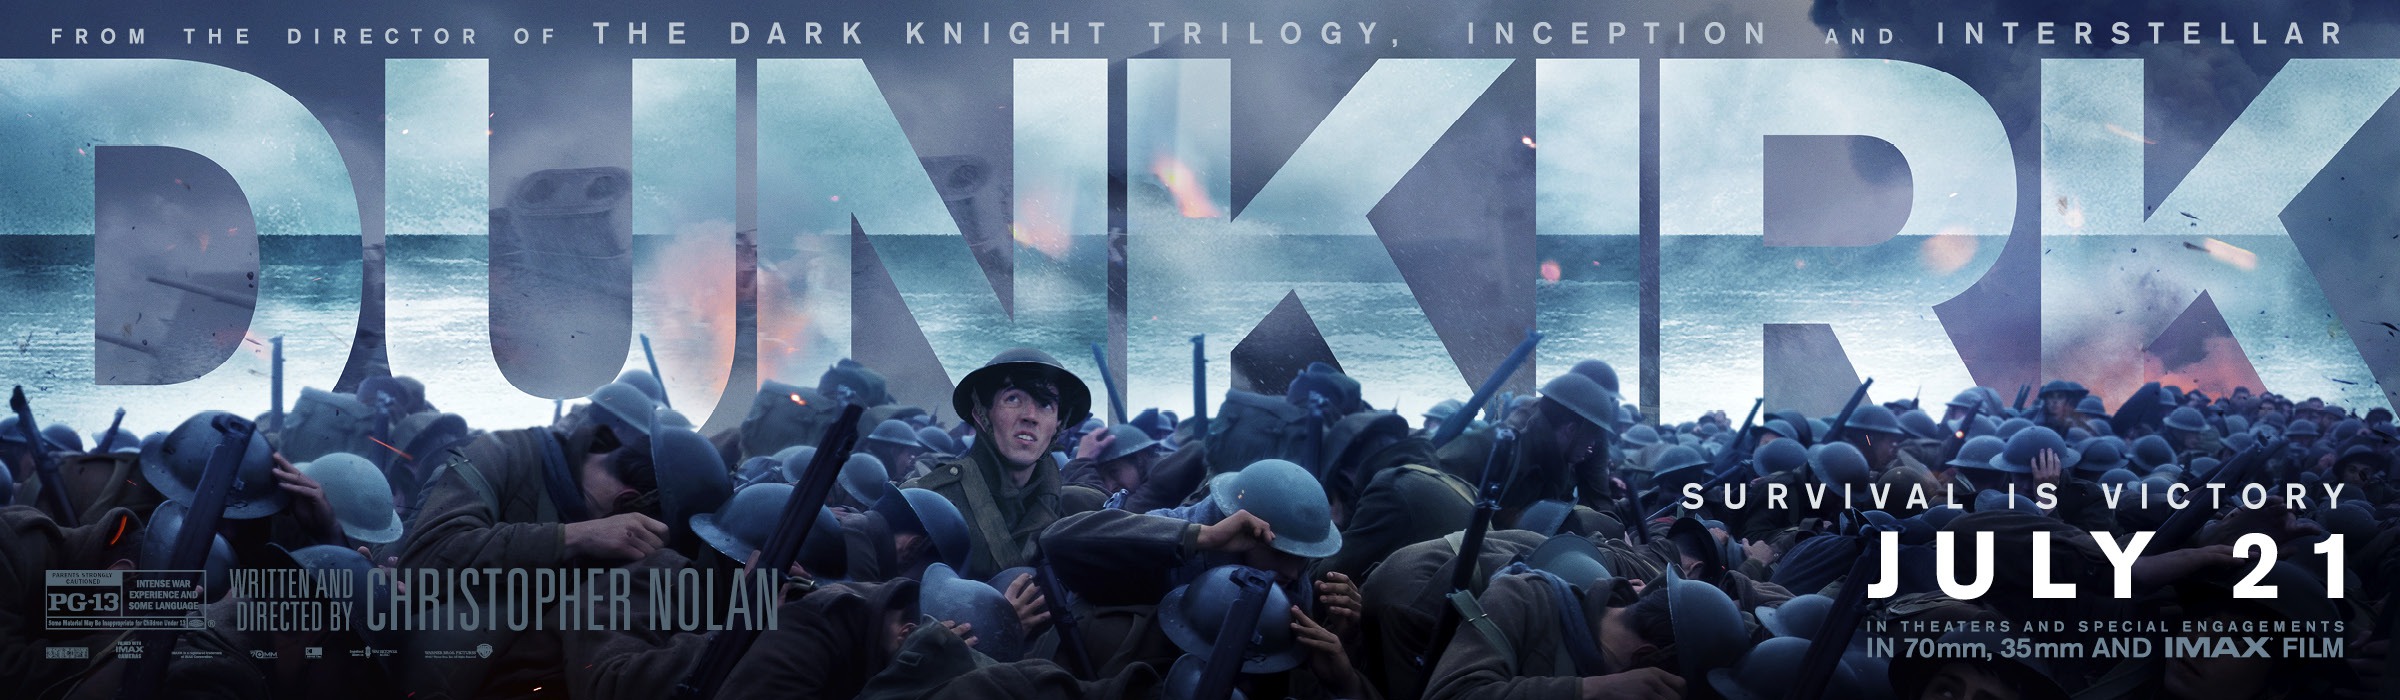 Mega Sized Movie Poster Image for Dunkirk (#7 of 12)